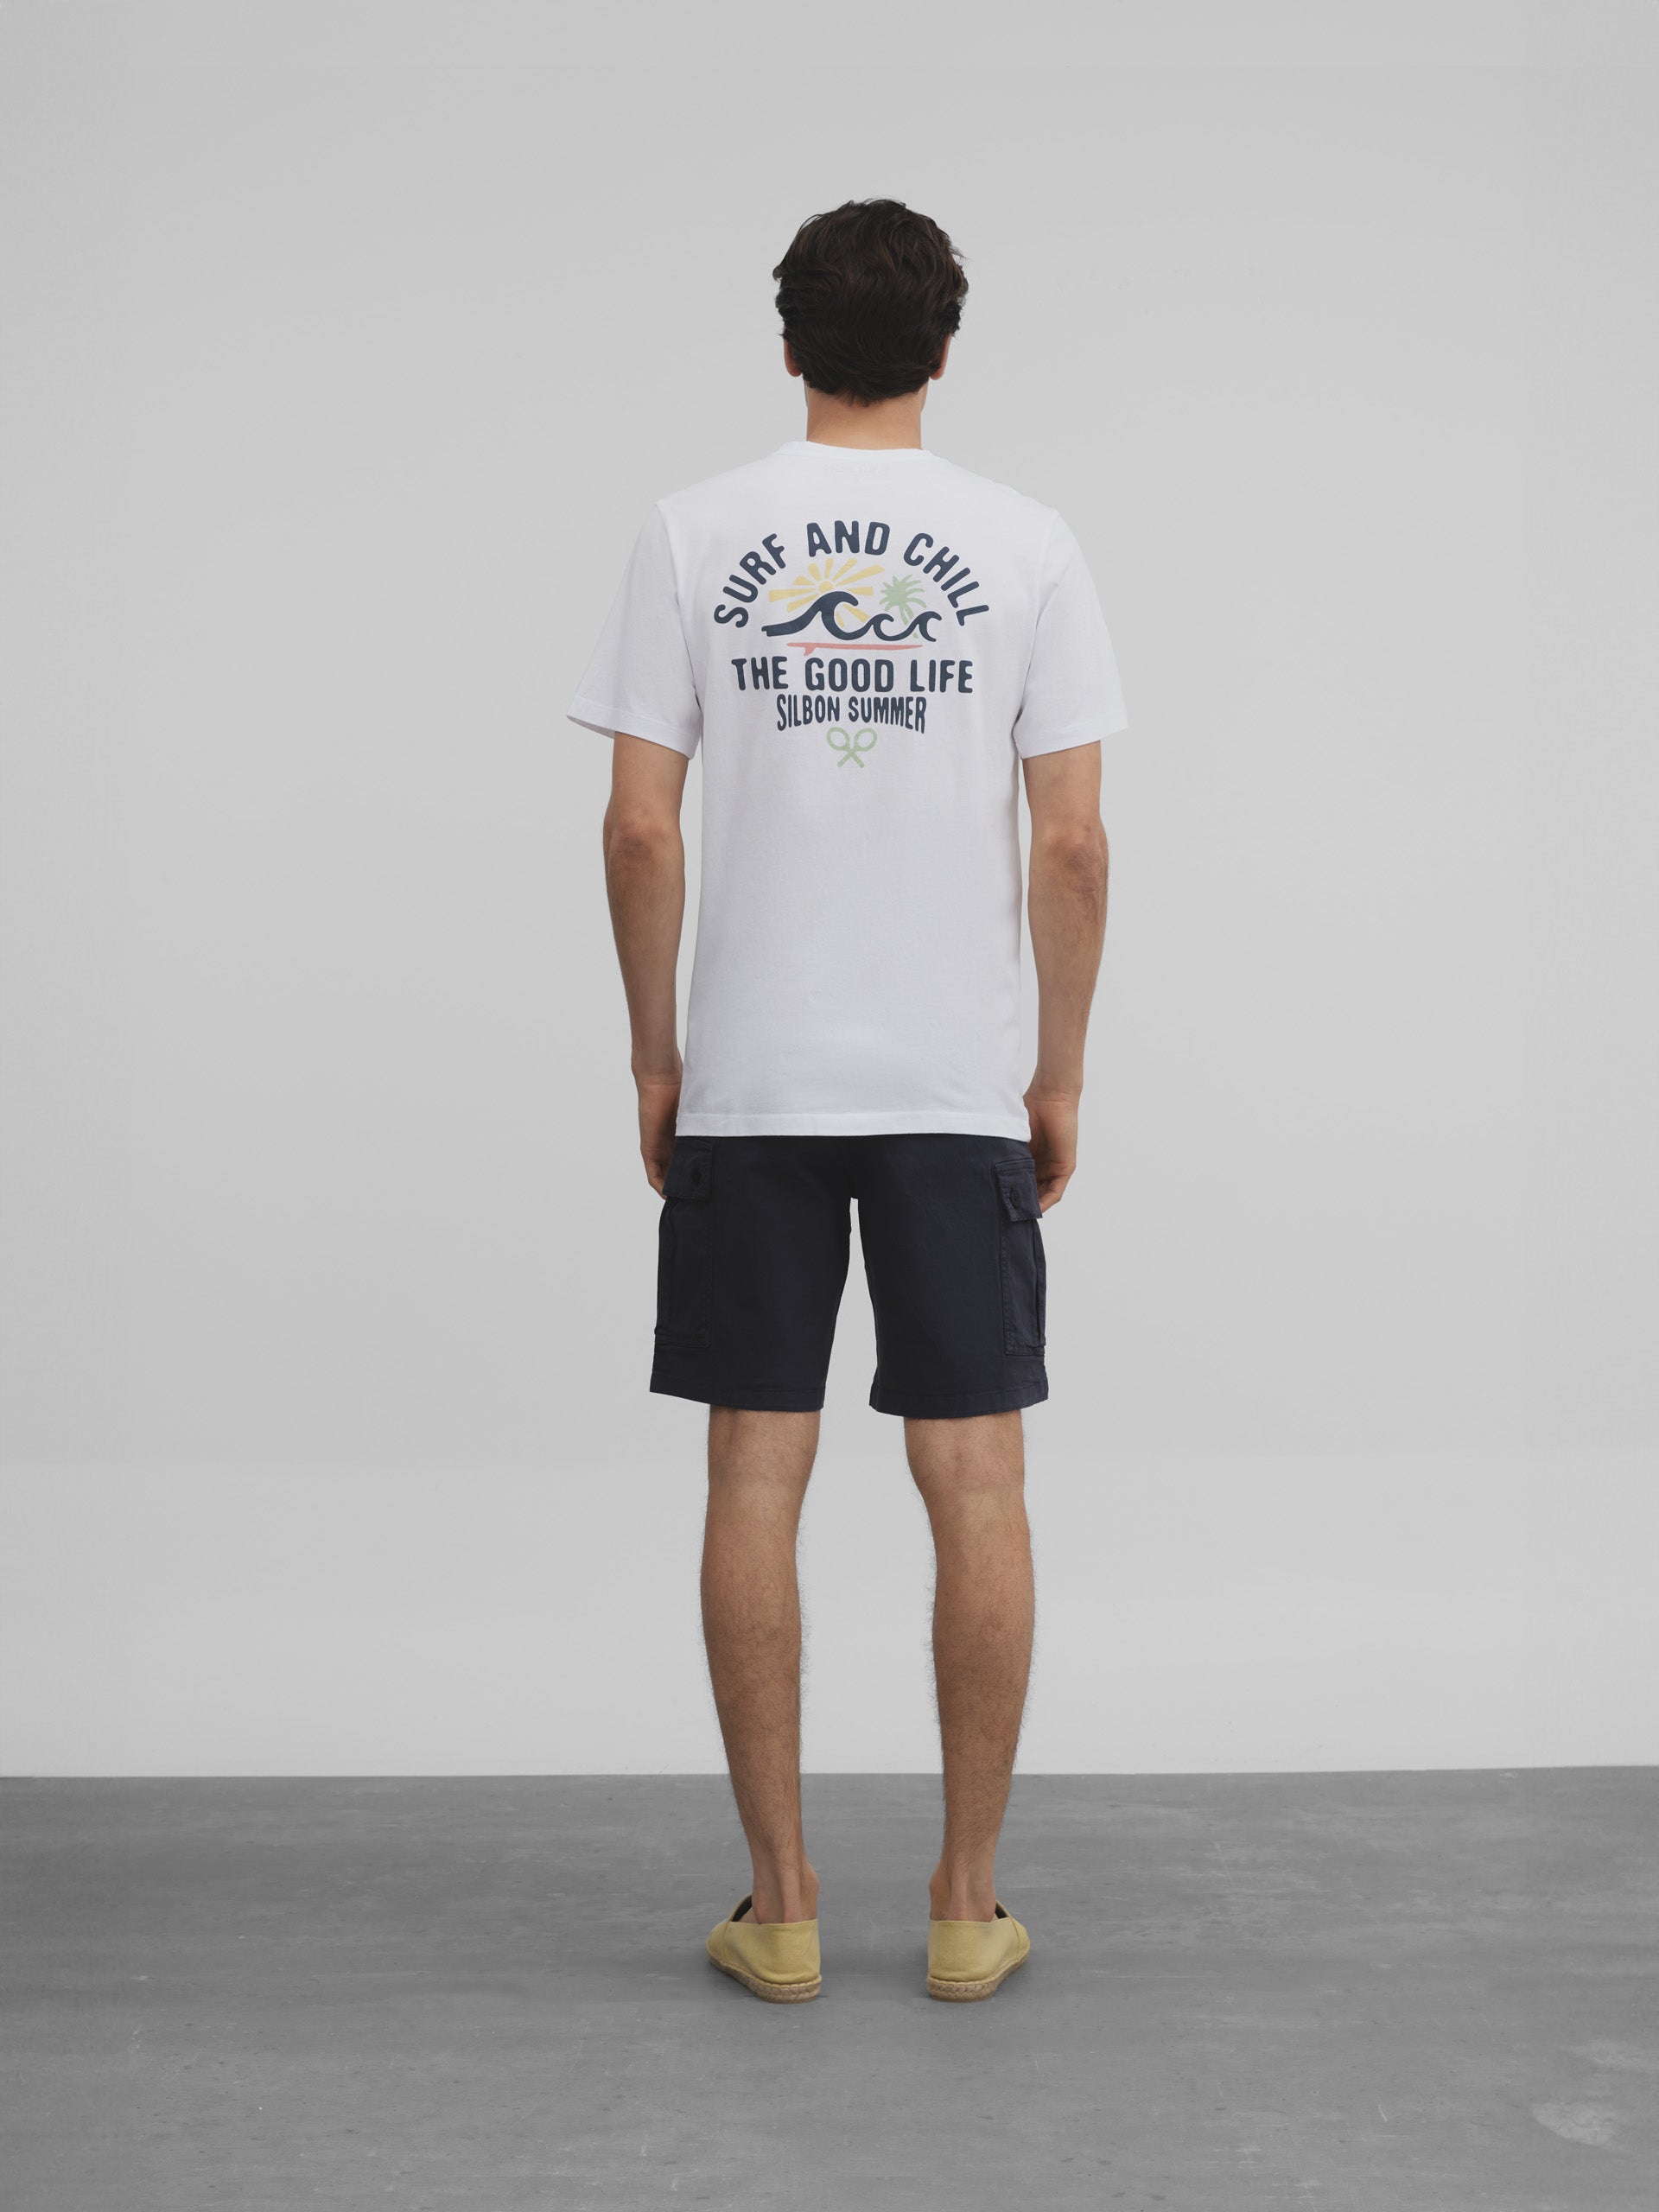 White surf and chill t-shirt